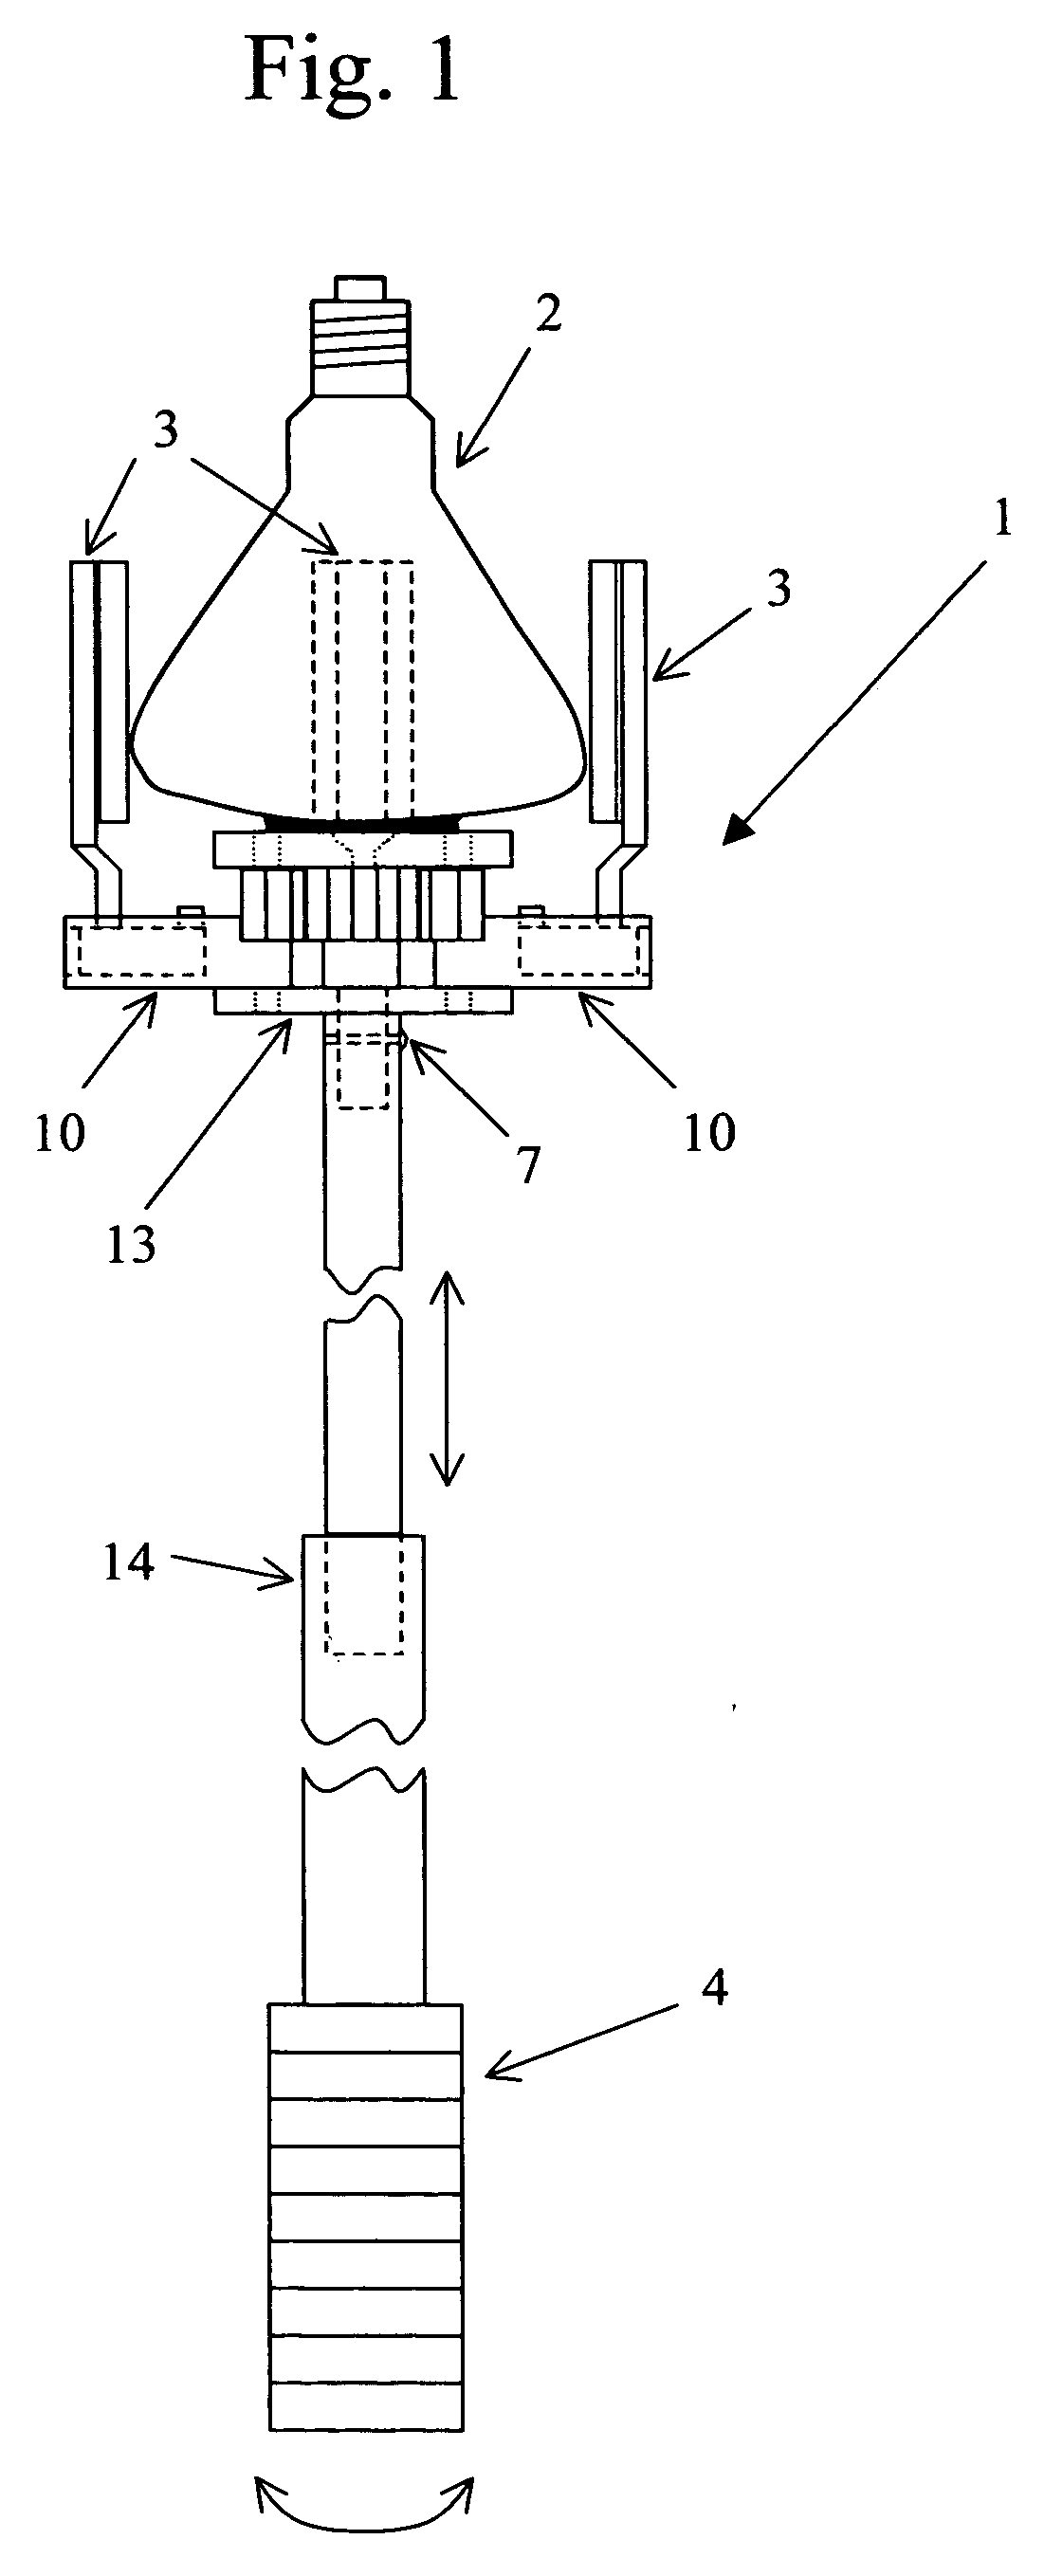 Light bulb installation and removal device